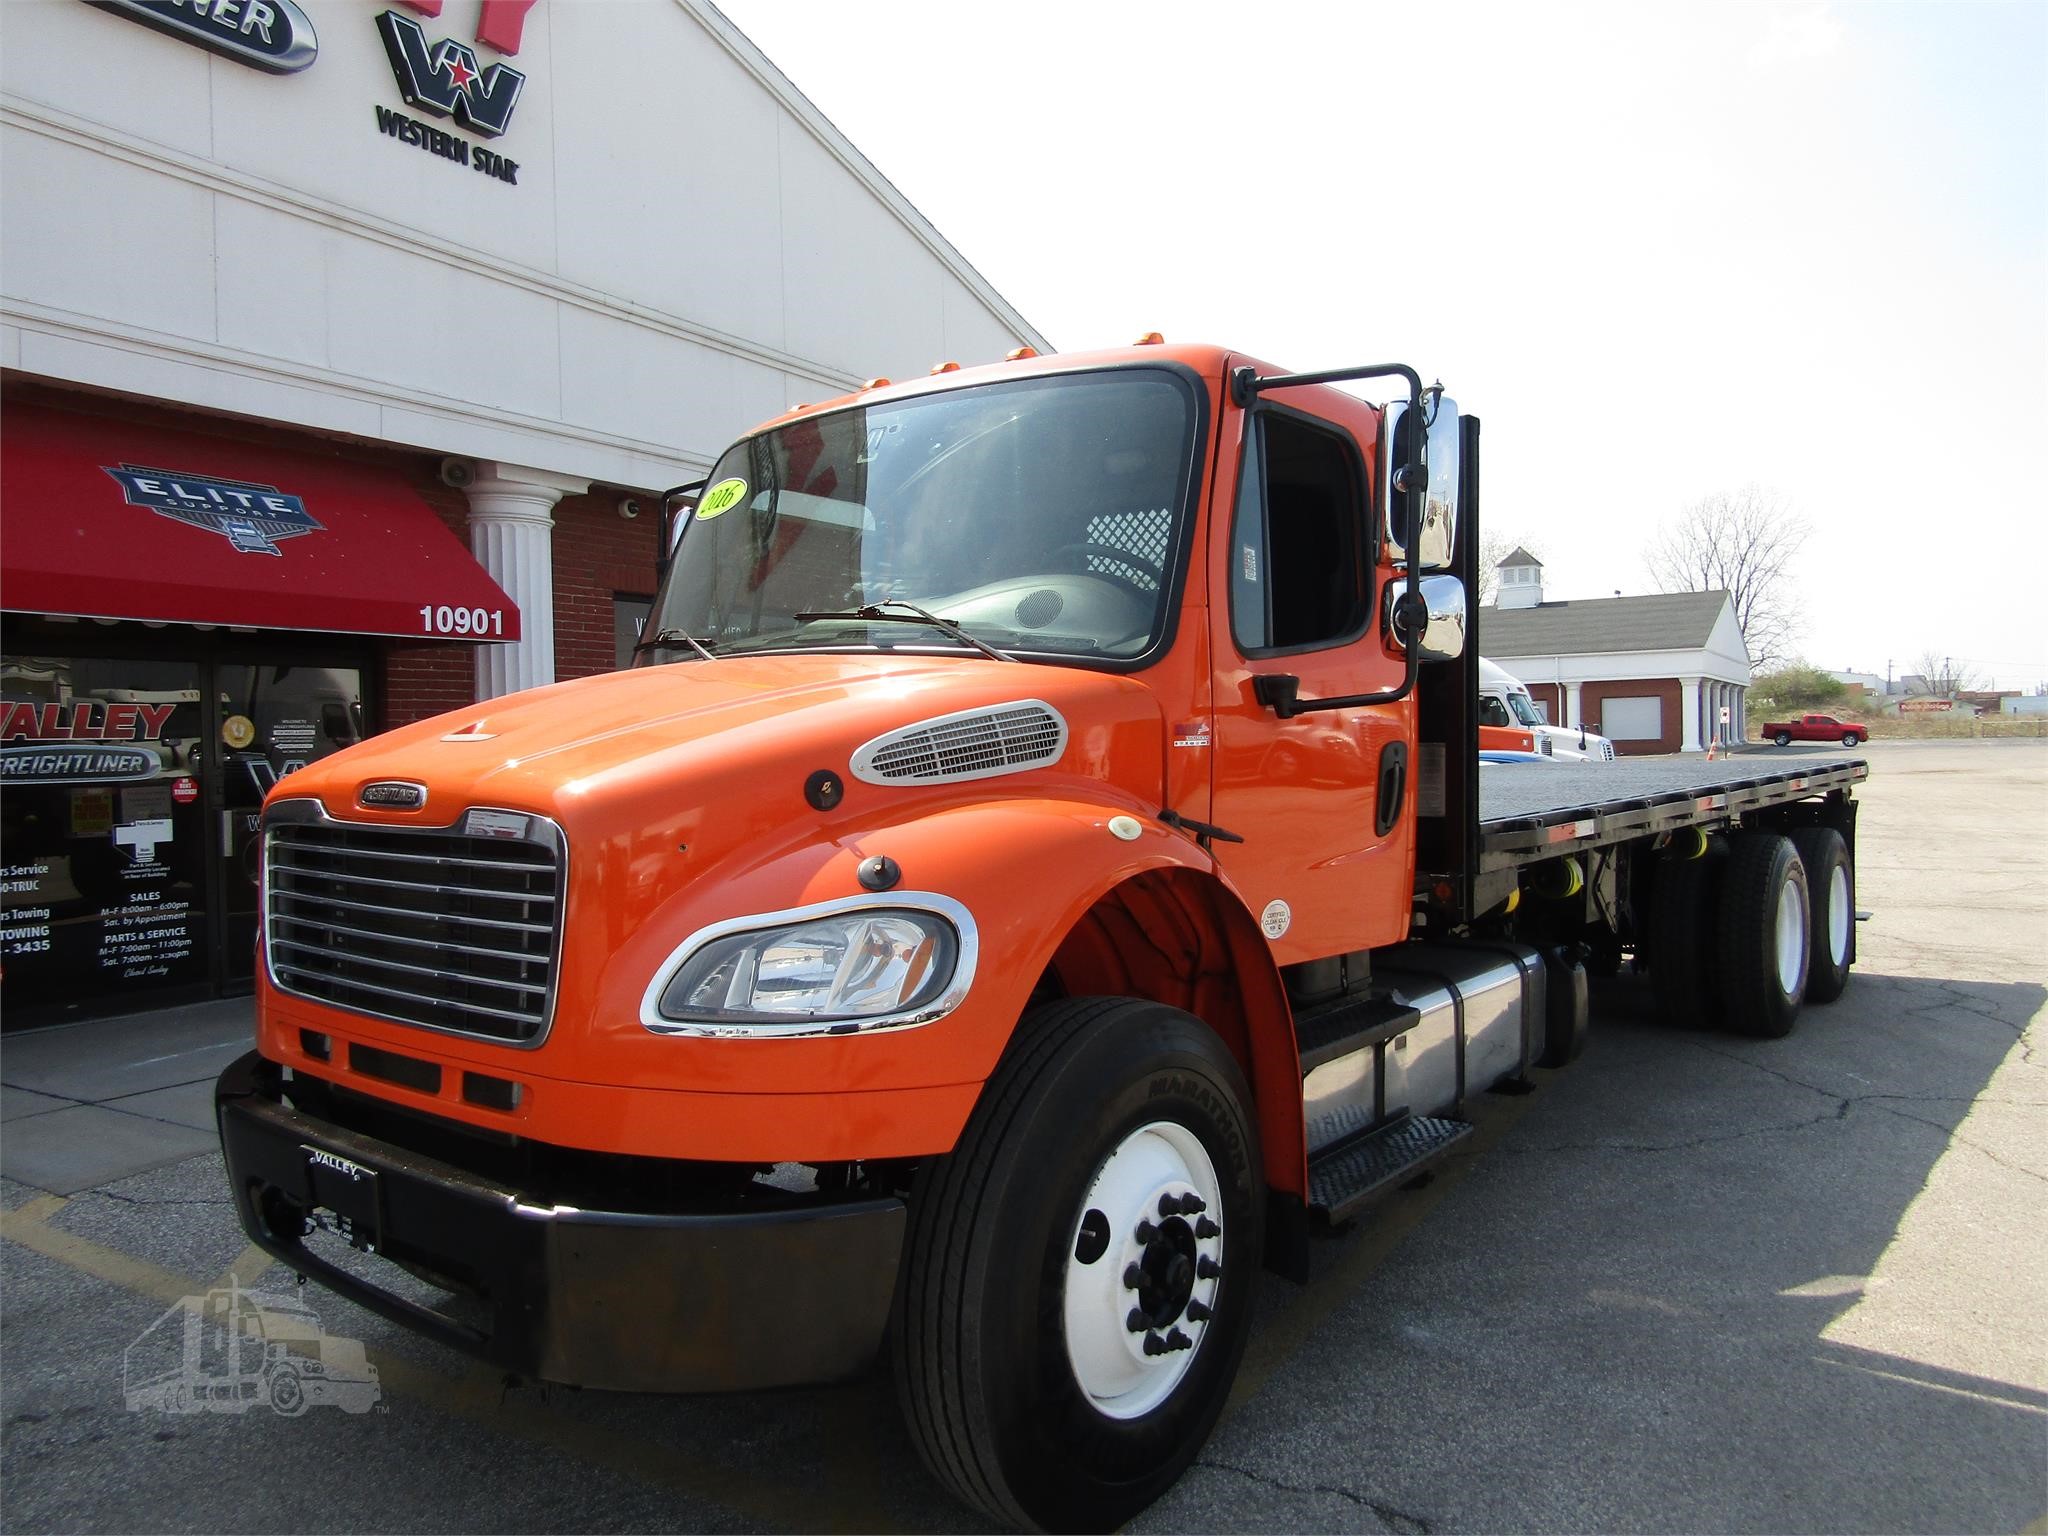 Flatbed Trucks For Sale In Cleveland Ohio 39 Listings Truckpaper Com Page 1 Of 2 [ 1536 x 2048 Pixel ]